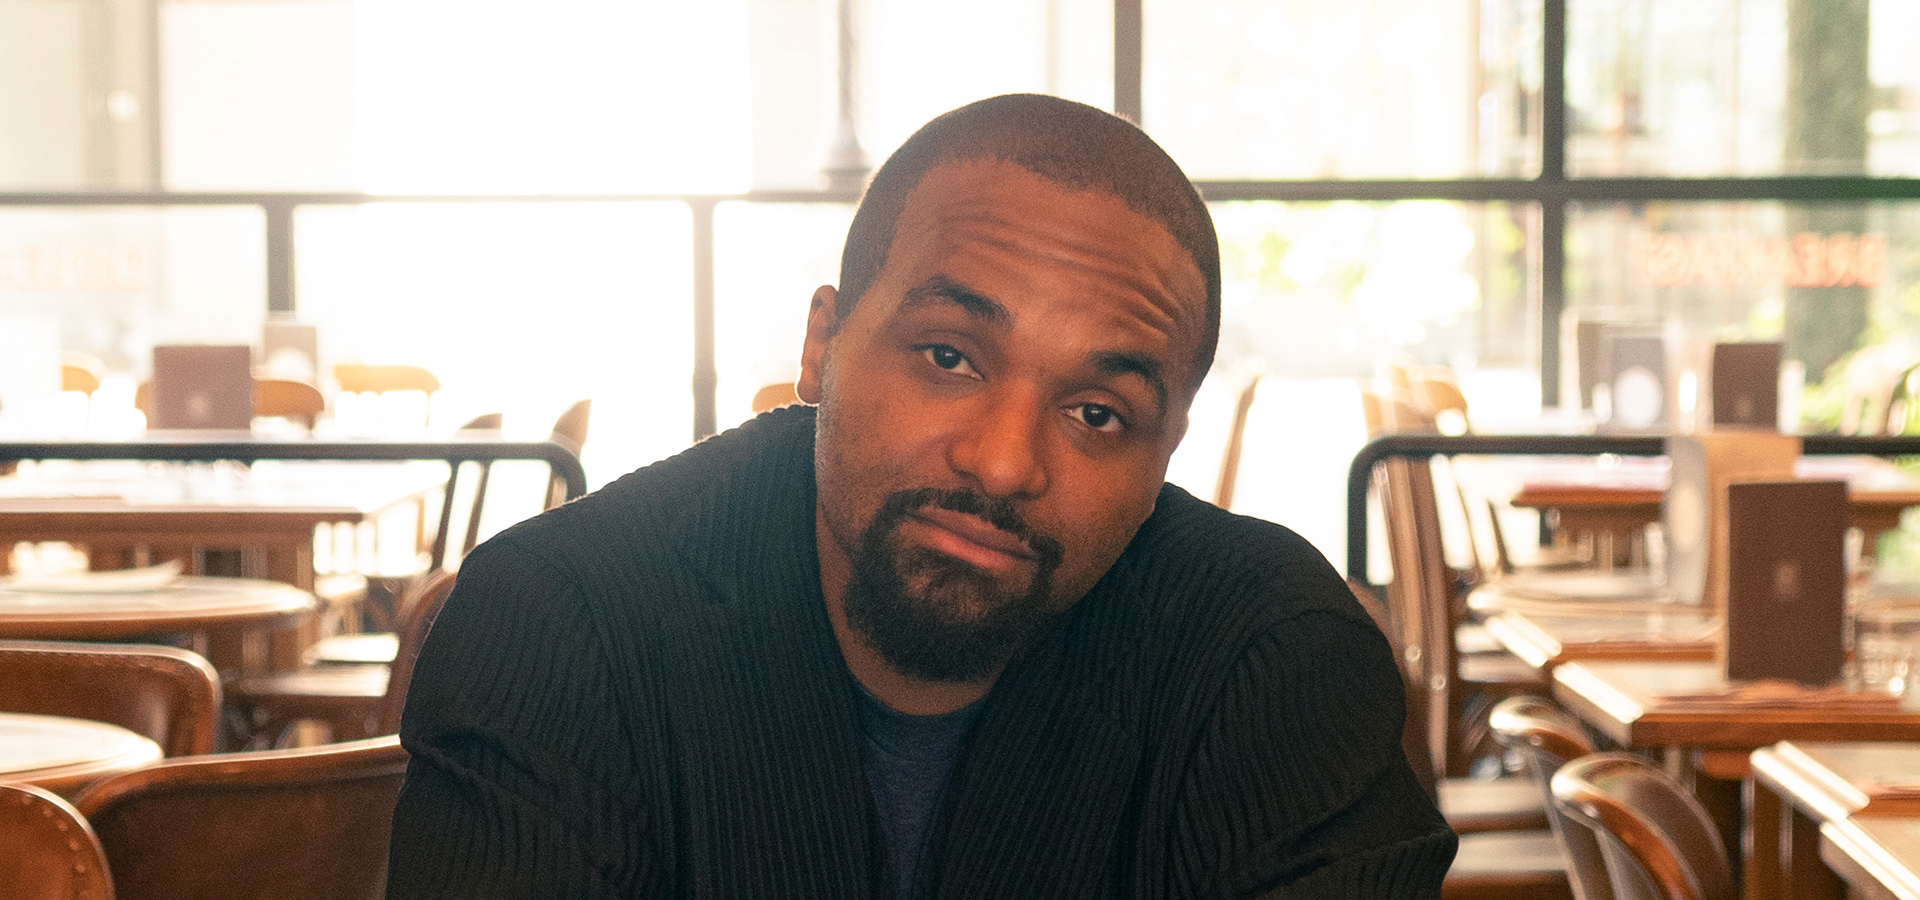 Sullivan Fortner looks directly into the camera while sitting backwards on a wooden chair and wearing a striped suit for this close up image.